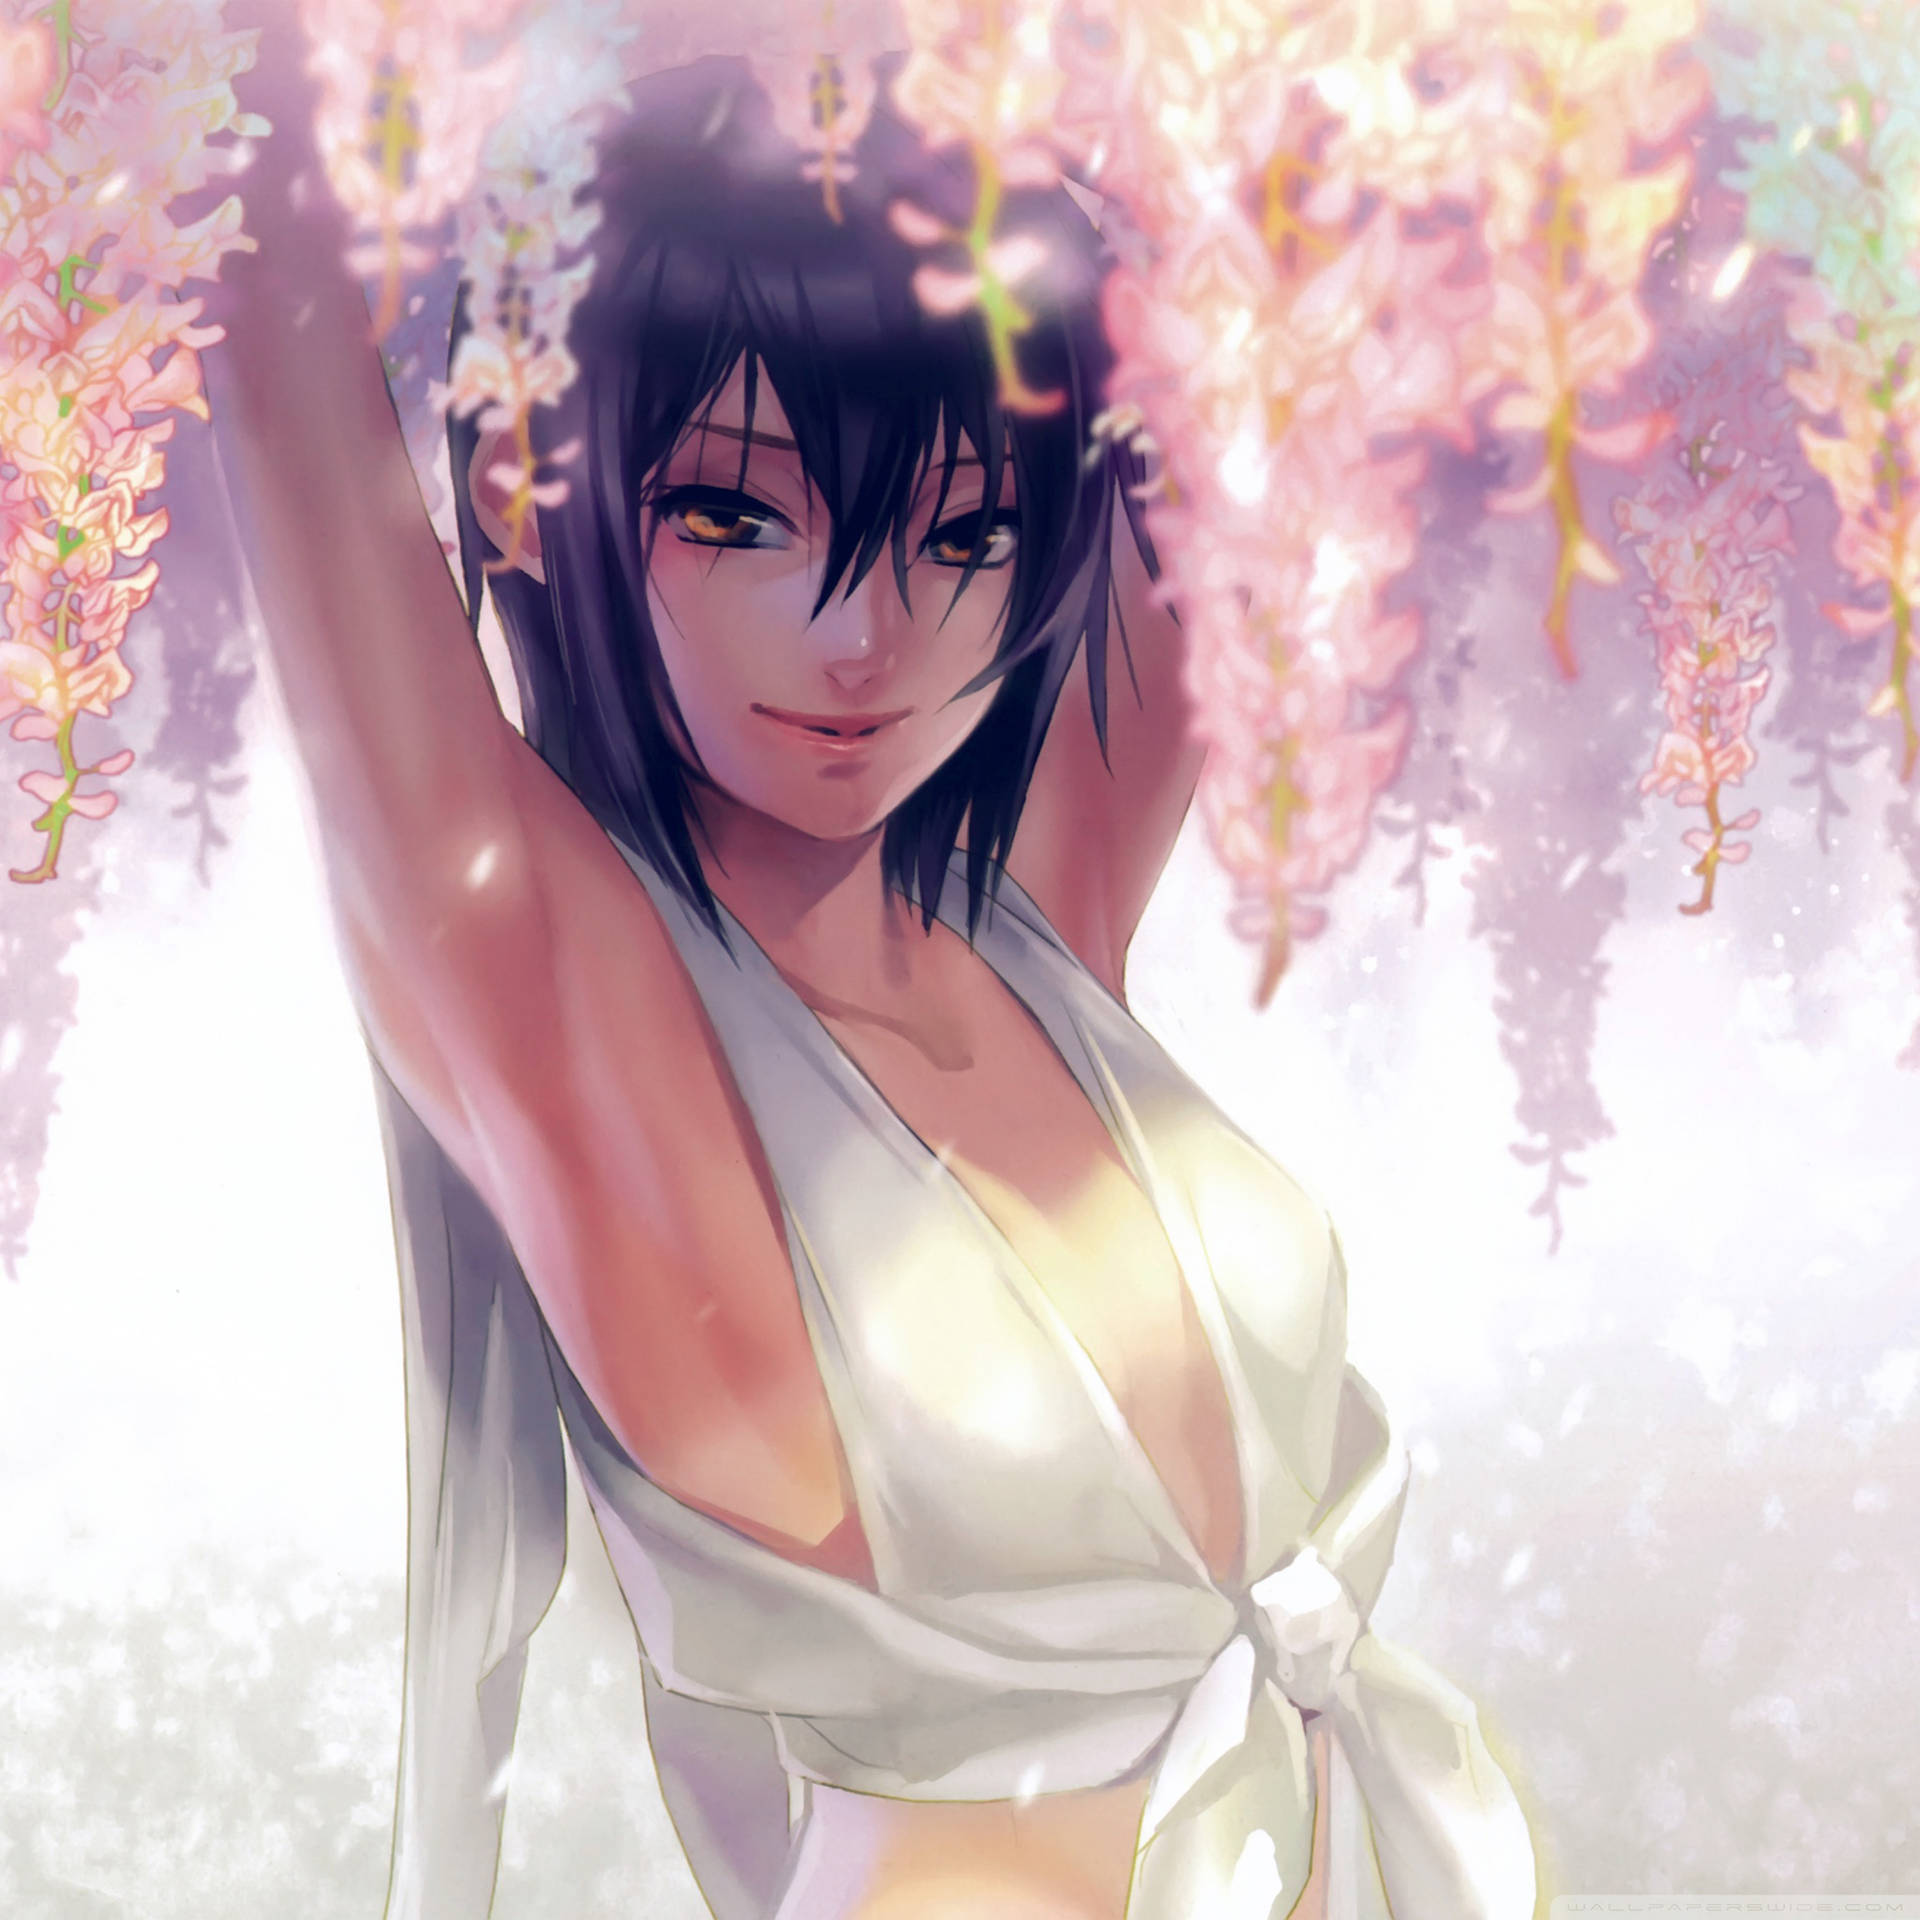 Sexy Anime Girl With Flowers